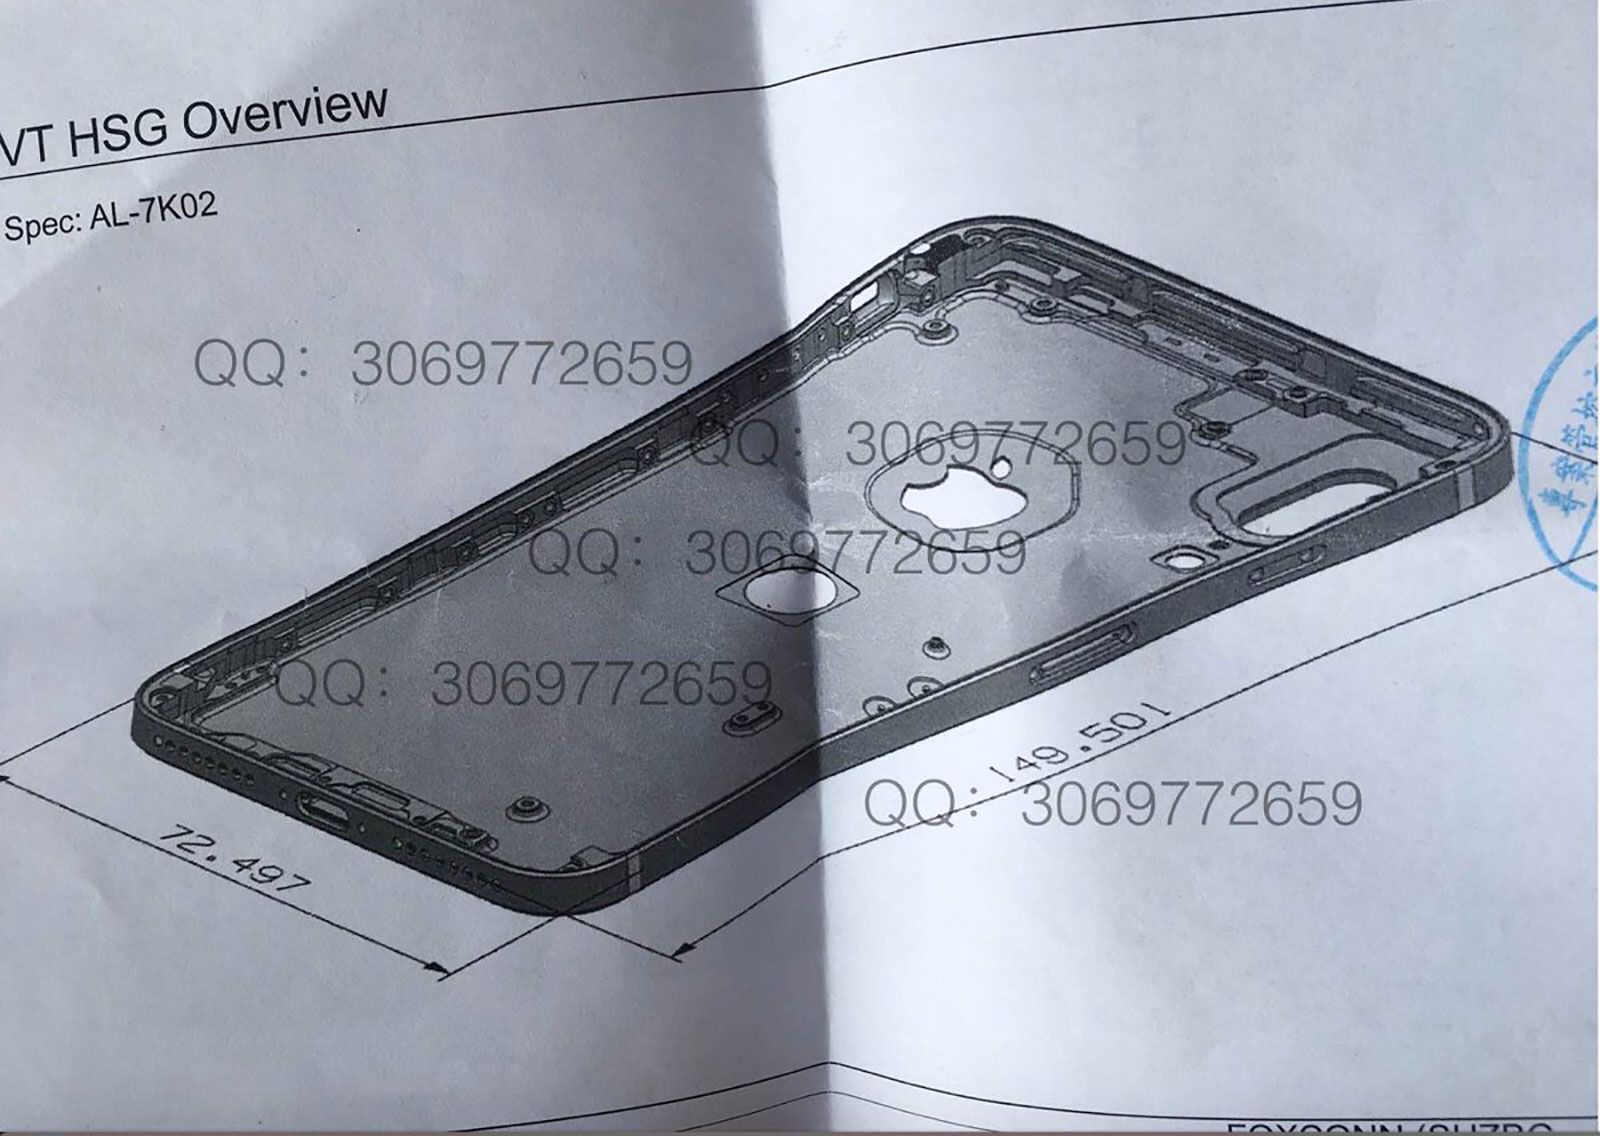 this latest iphone 8 schematic shows rear mounted touch id sensor image 1